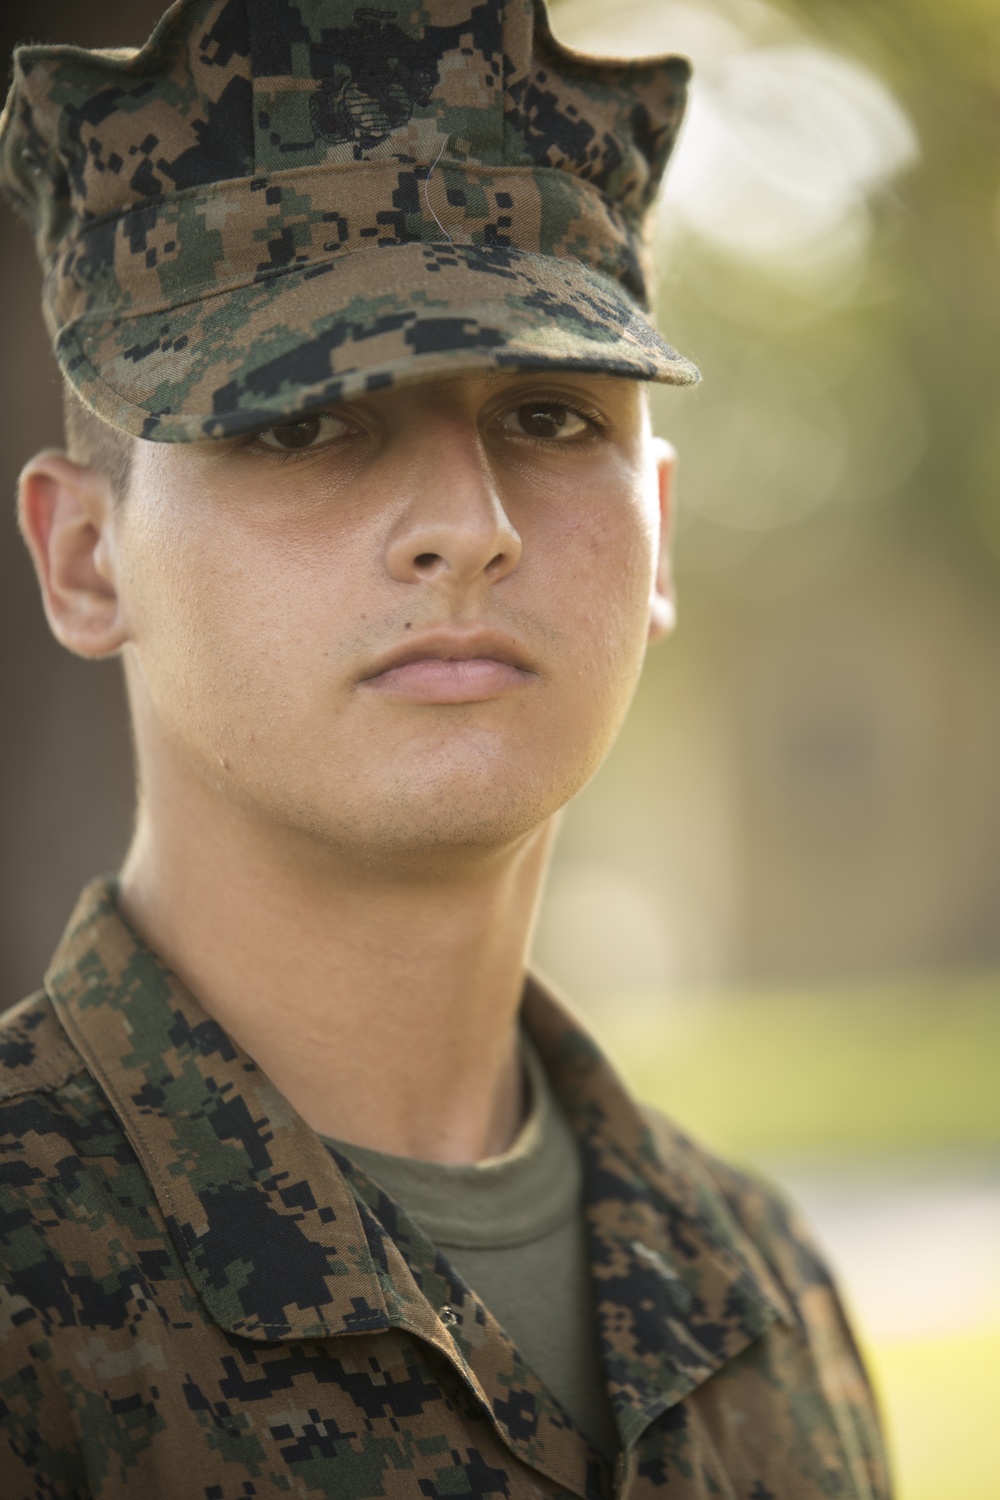 Smithtown, N.Y., native training at Parris Island to become U.S. Marine